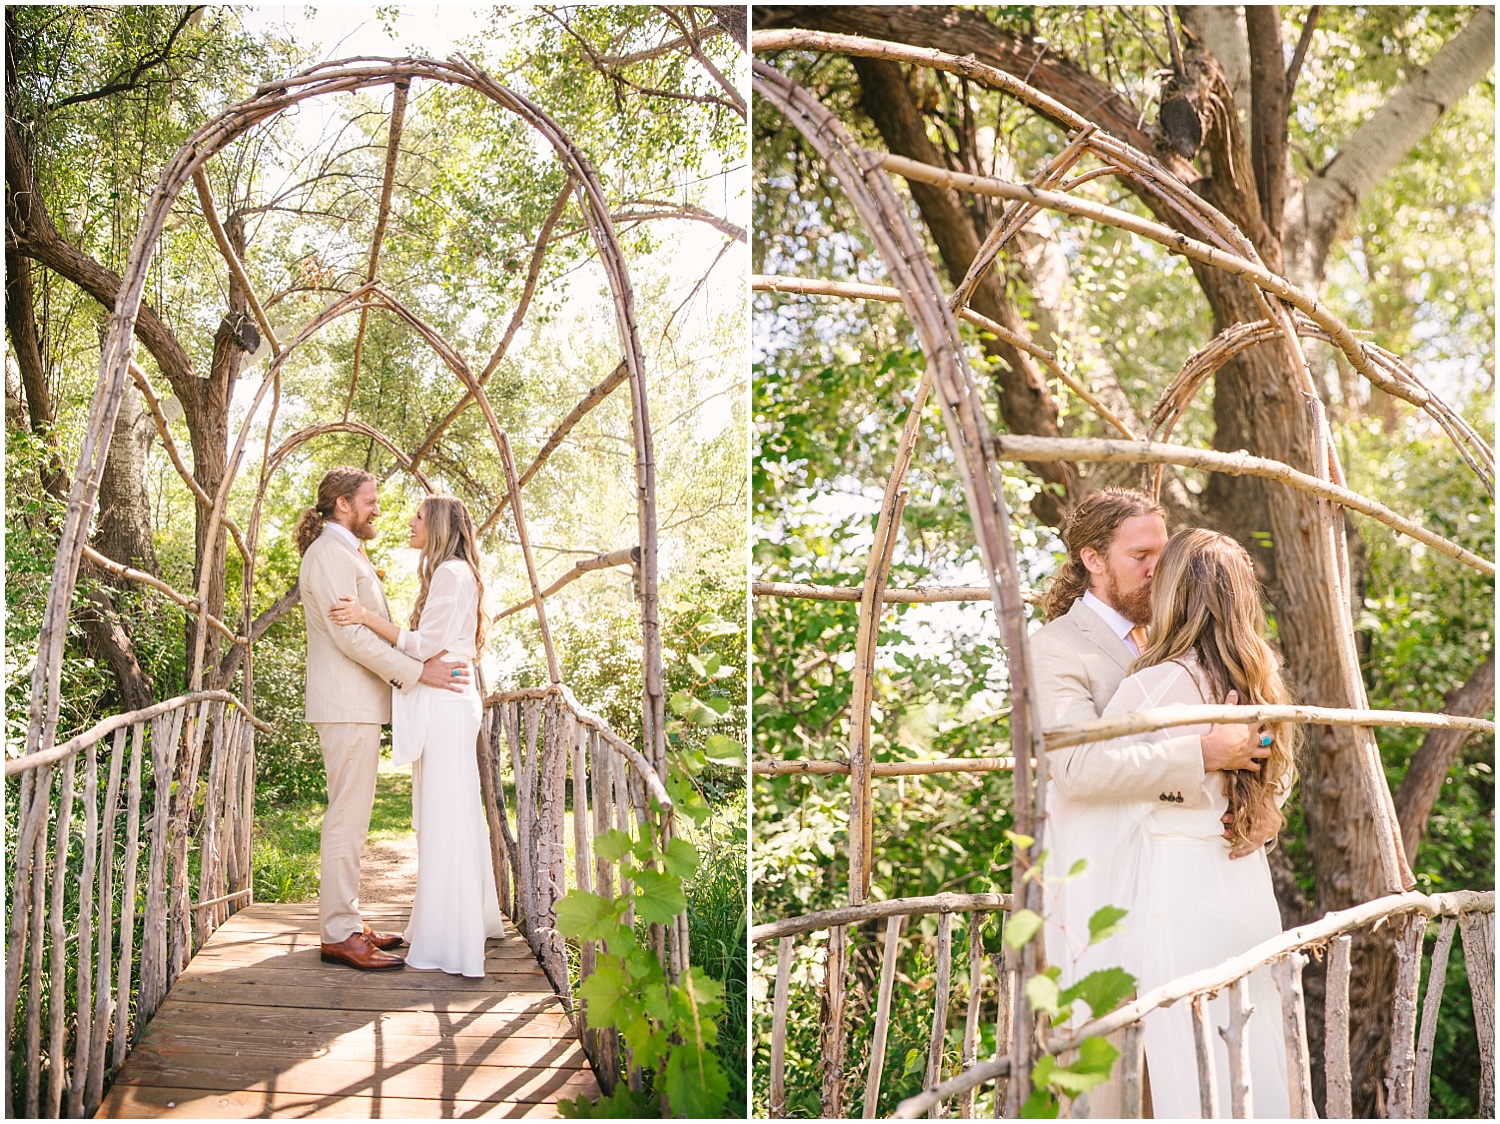 Bride and groom share an emotional moment on wooden bridge at Lone Hawk Farm wedding in Longmont Colorado